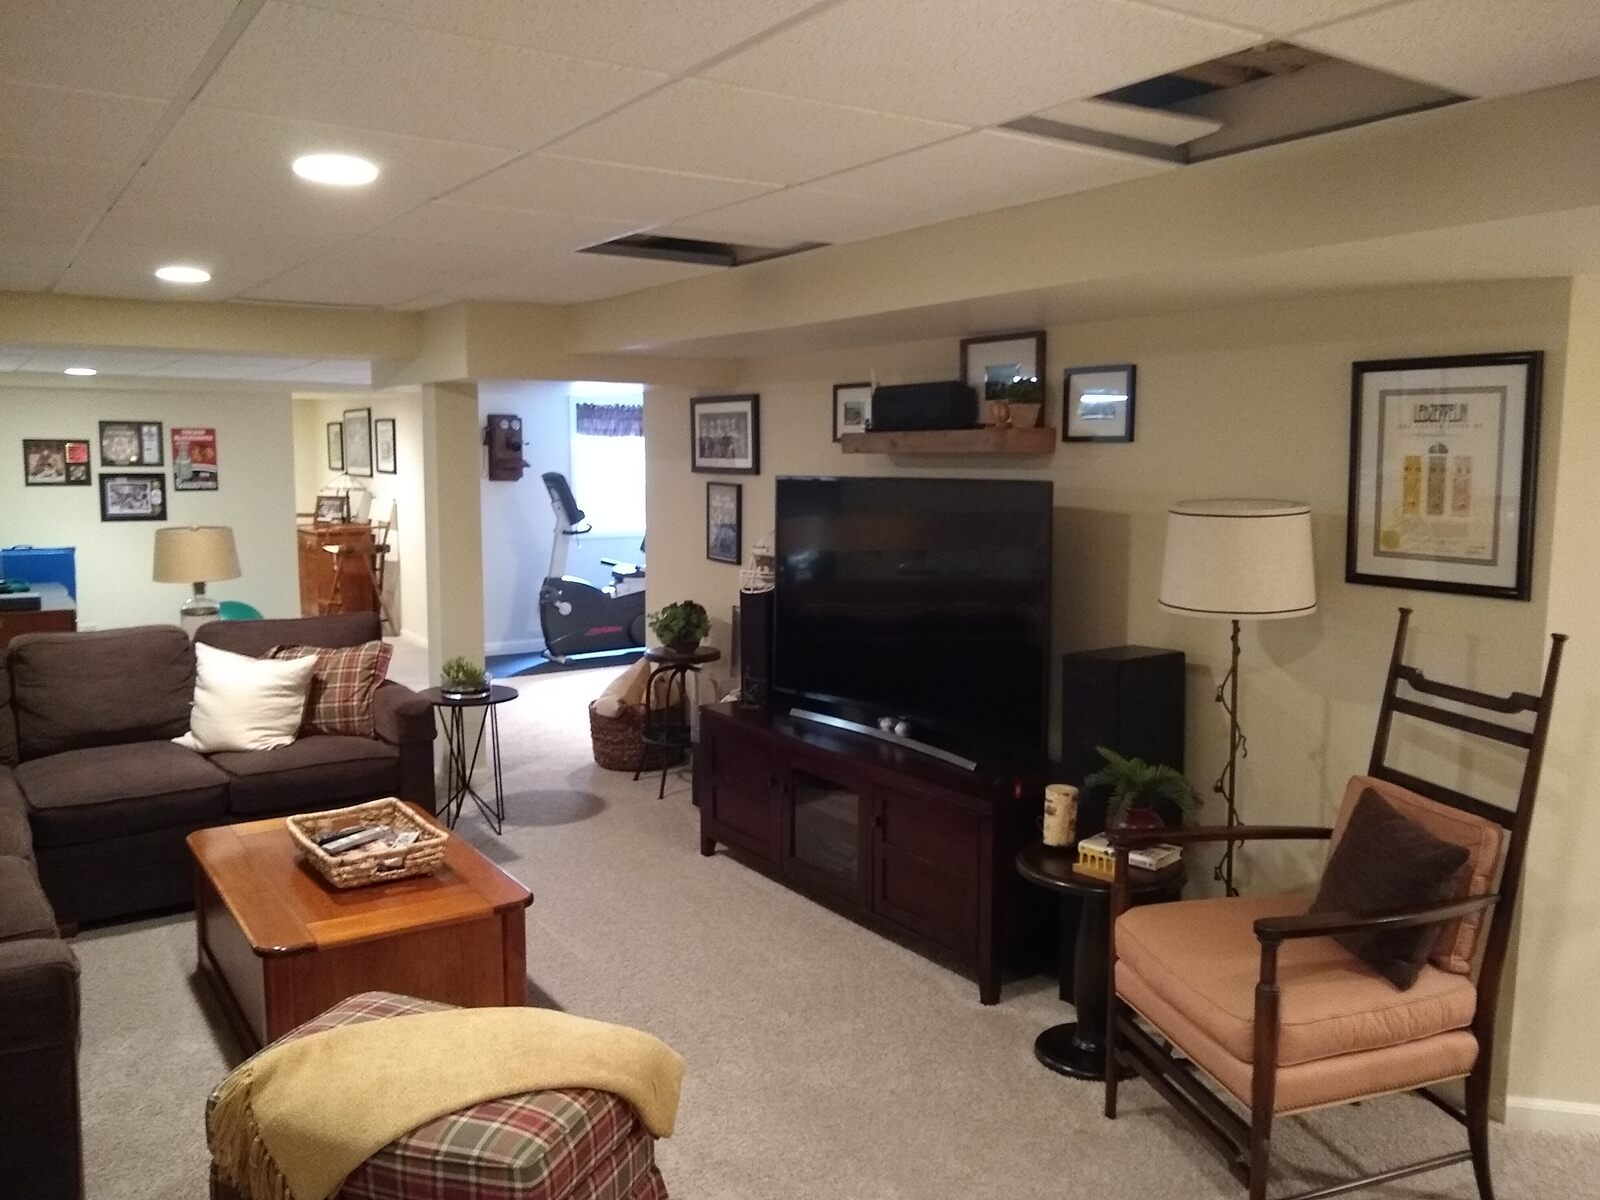 downstairs basement with tv and couches and exercise room in back in arlington heights